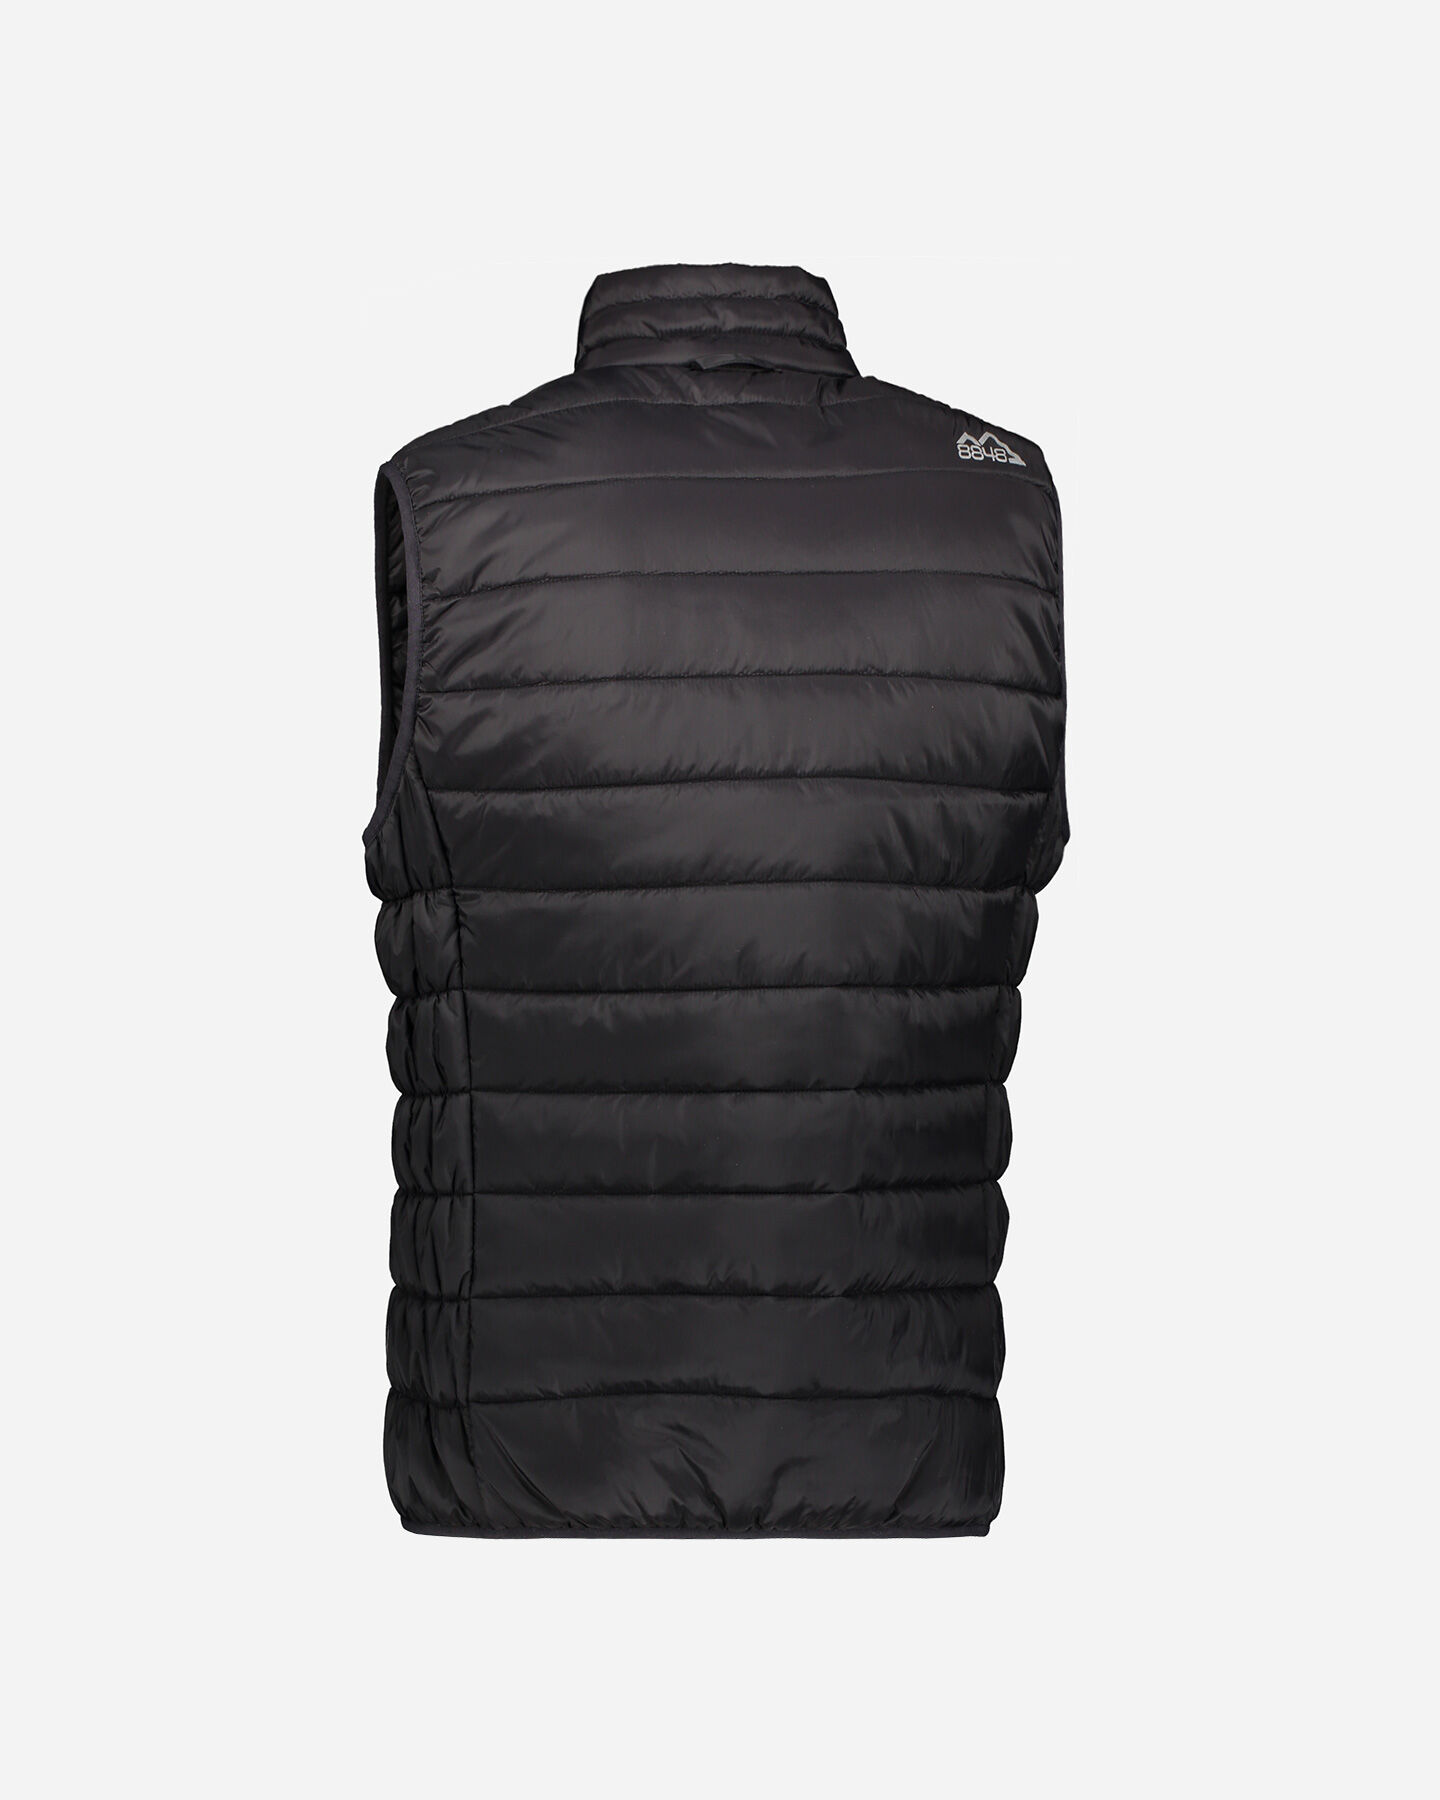  Gilet 8848 BASIC M S4069143|050|XS scatto 1